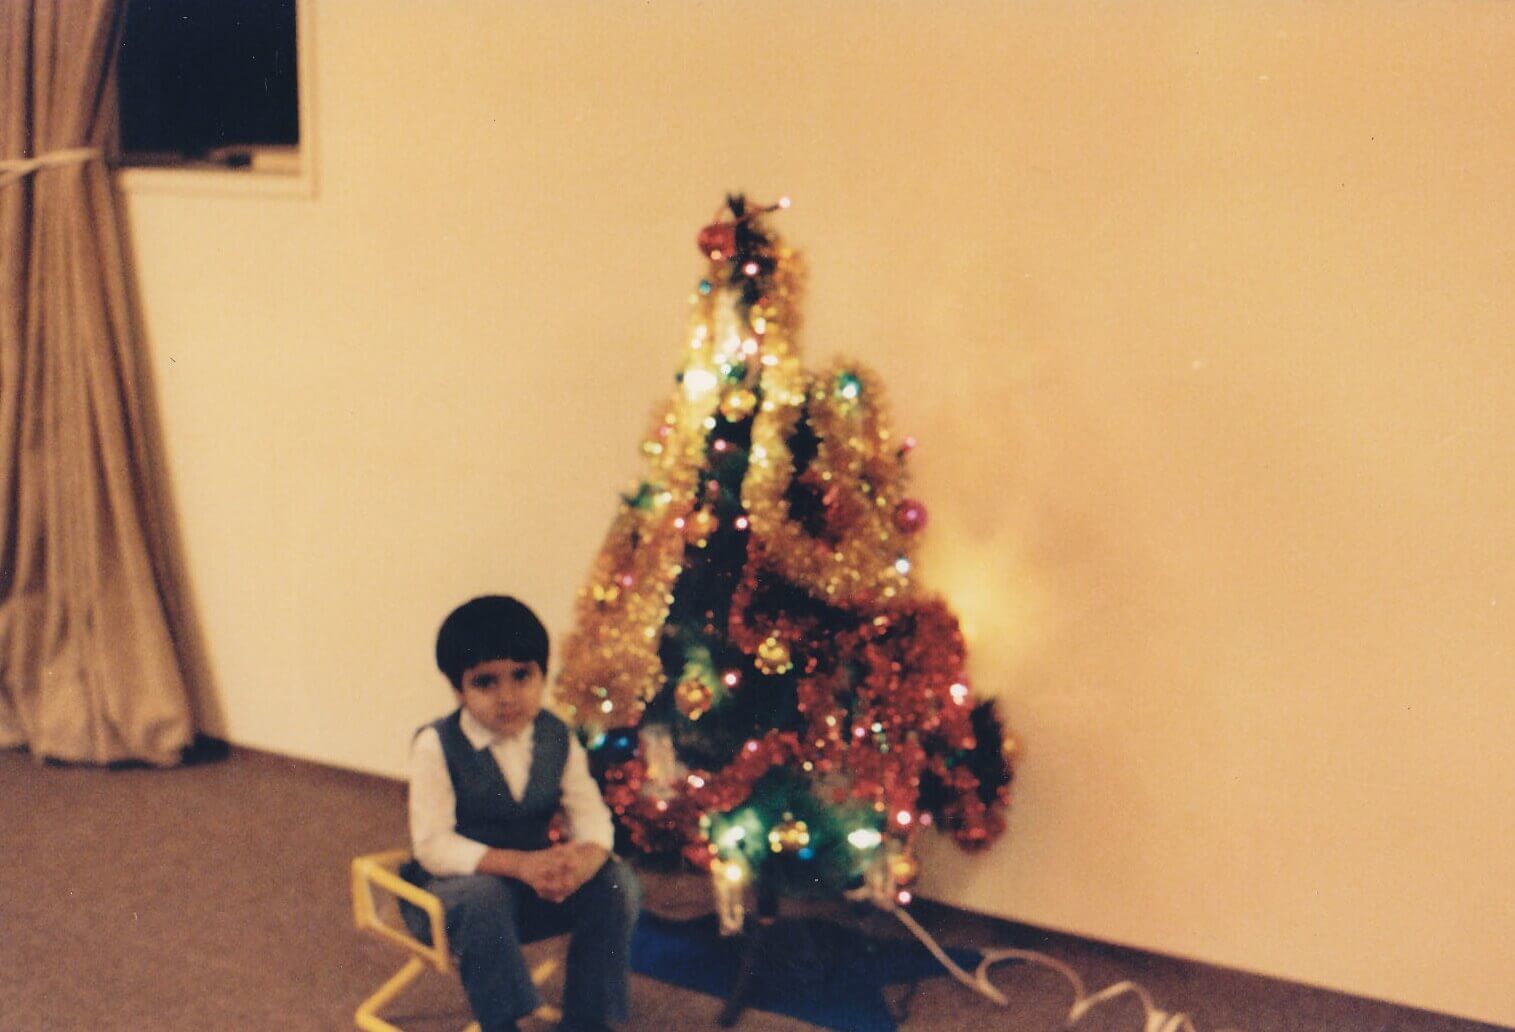 An even younger Vivek sits in front of a small, very '80s Christmas tree in a suburban living room, wearing a blue vest over a white dress shirt.